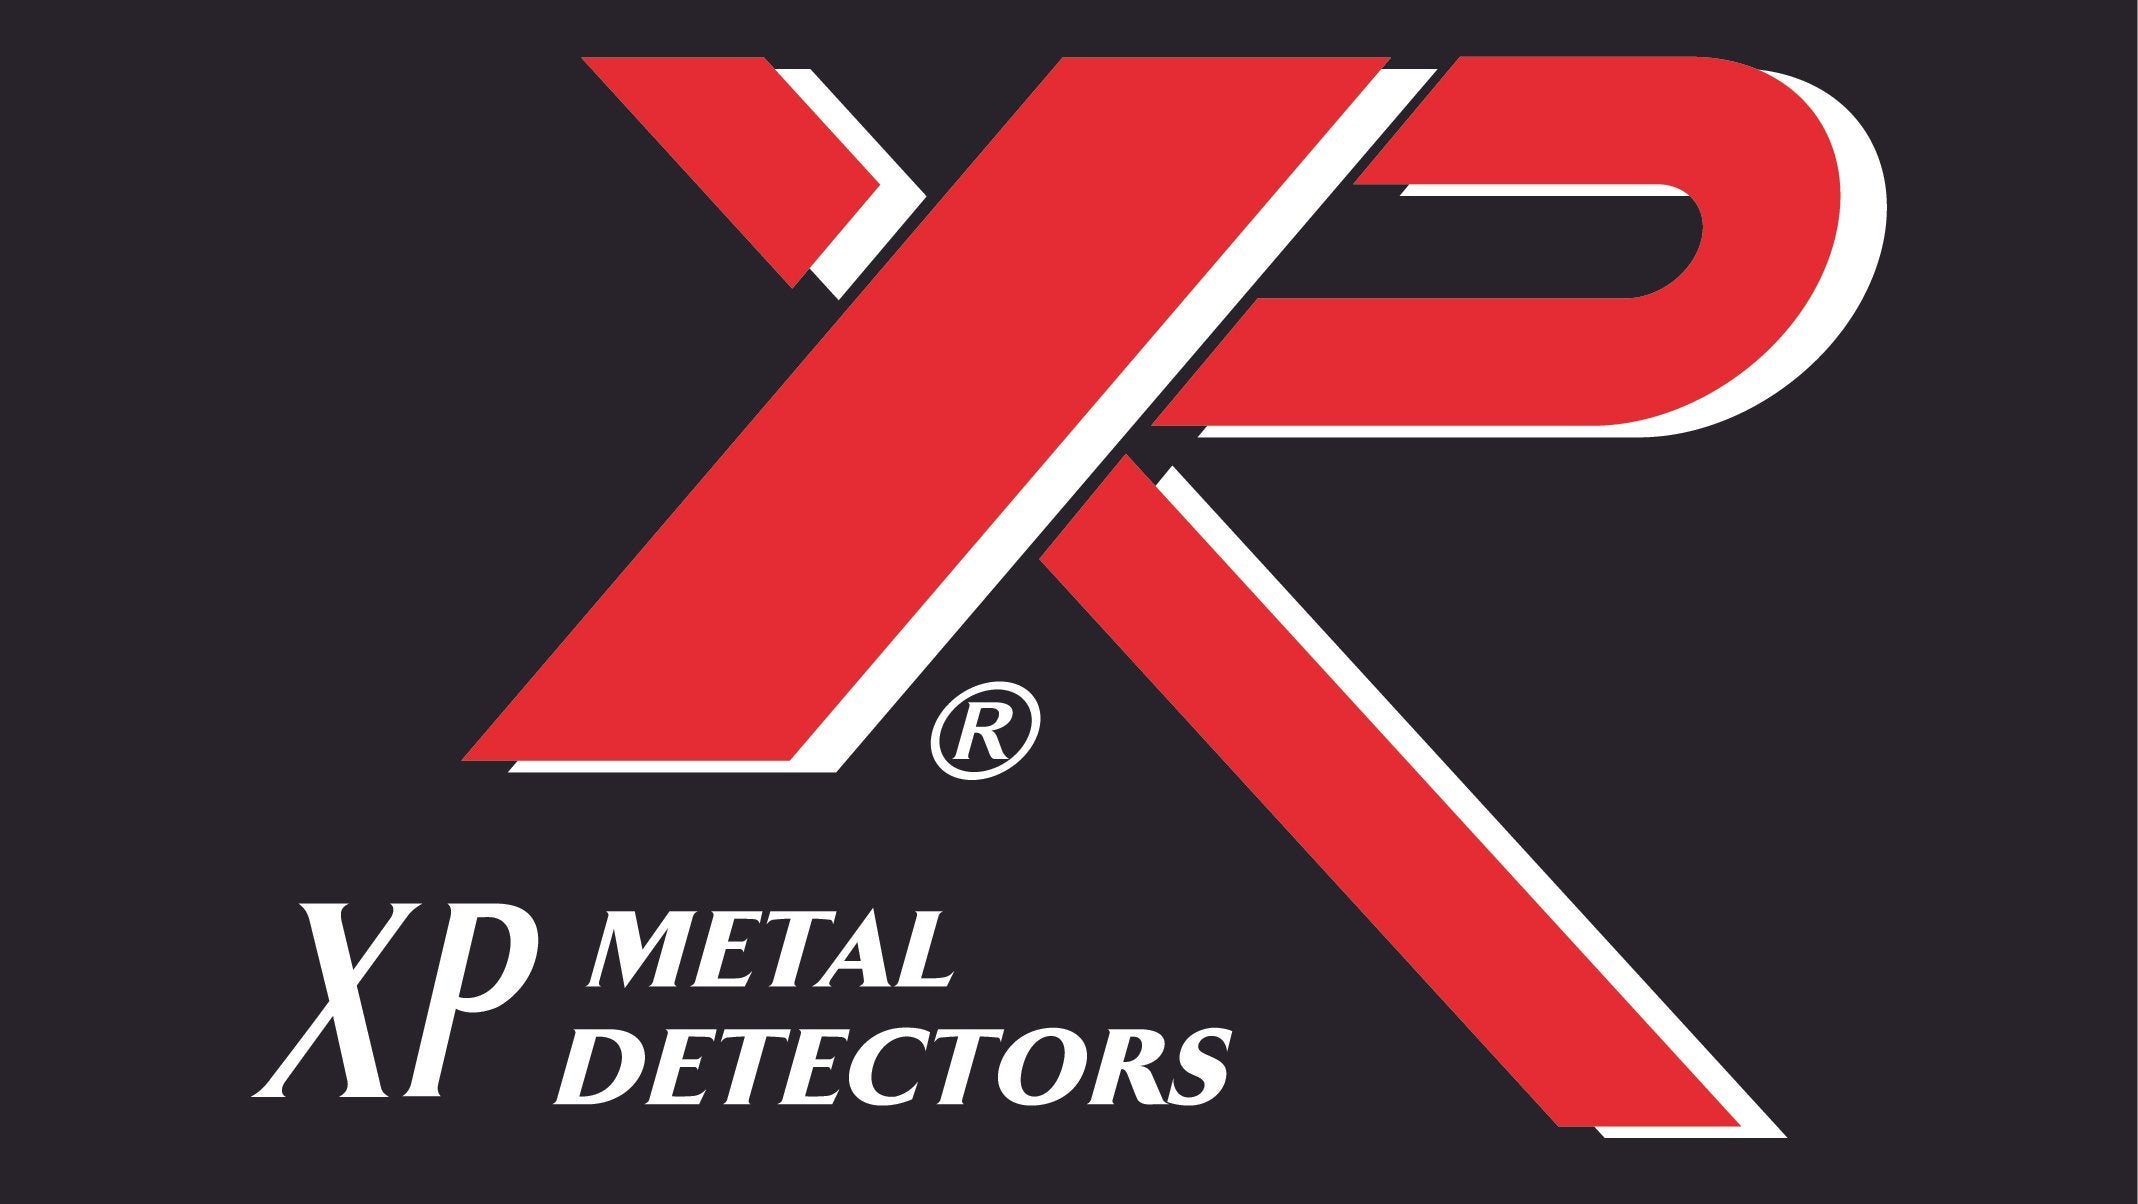 XP Metal Detectors Service and Support Center United States - Warranty And Service Support